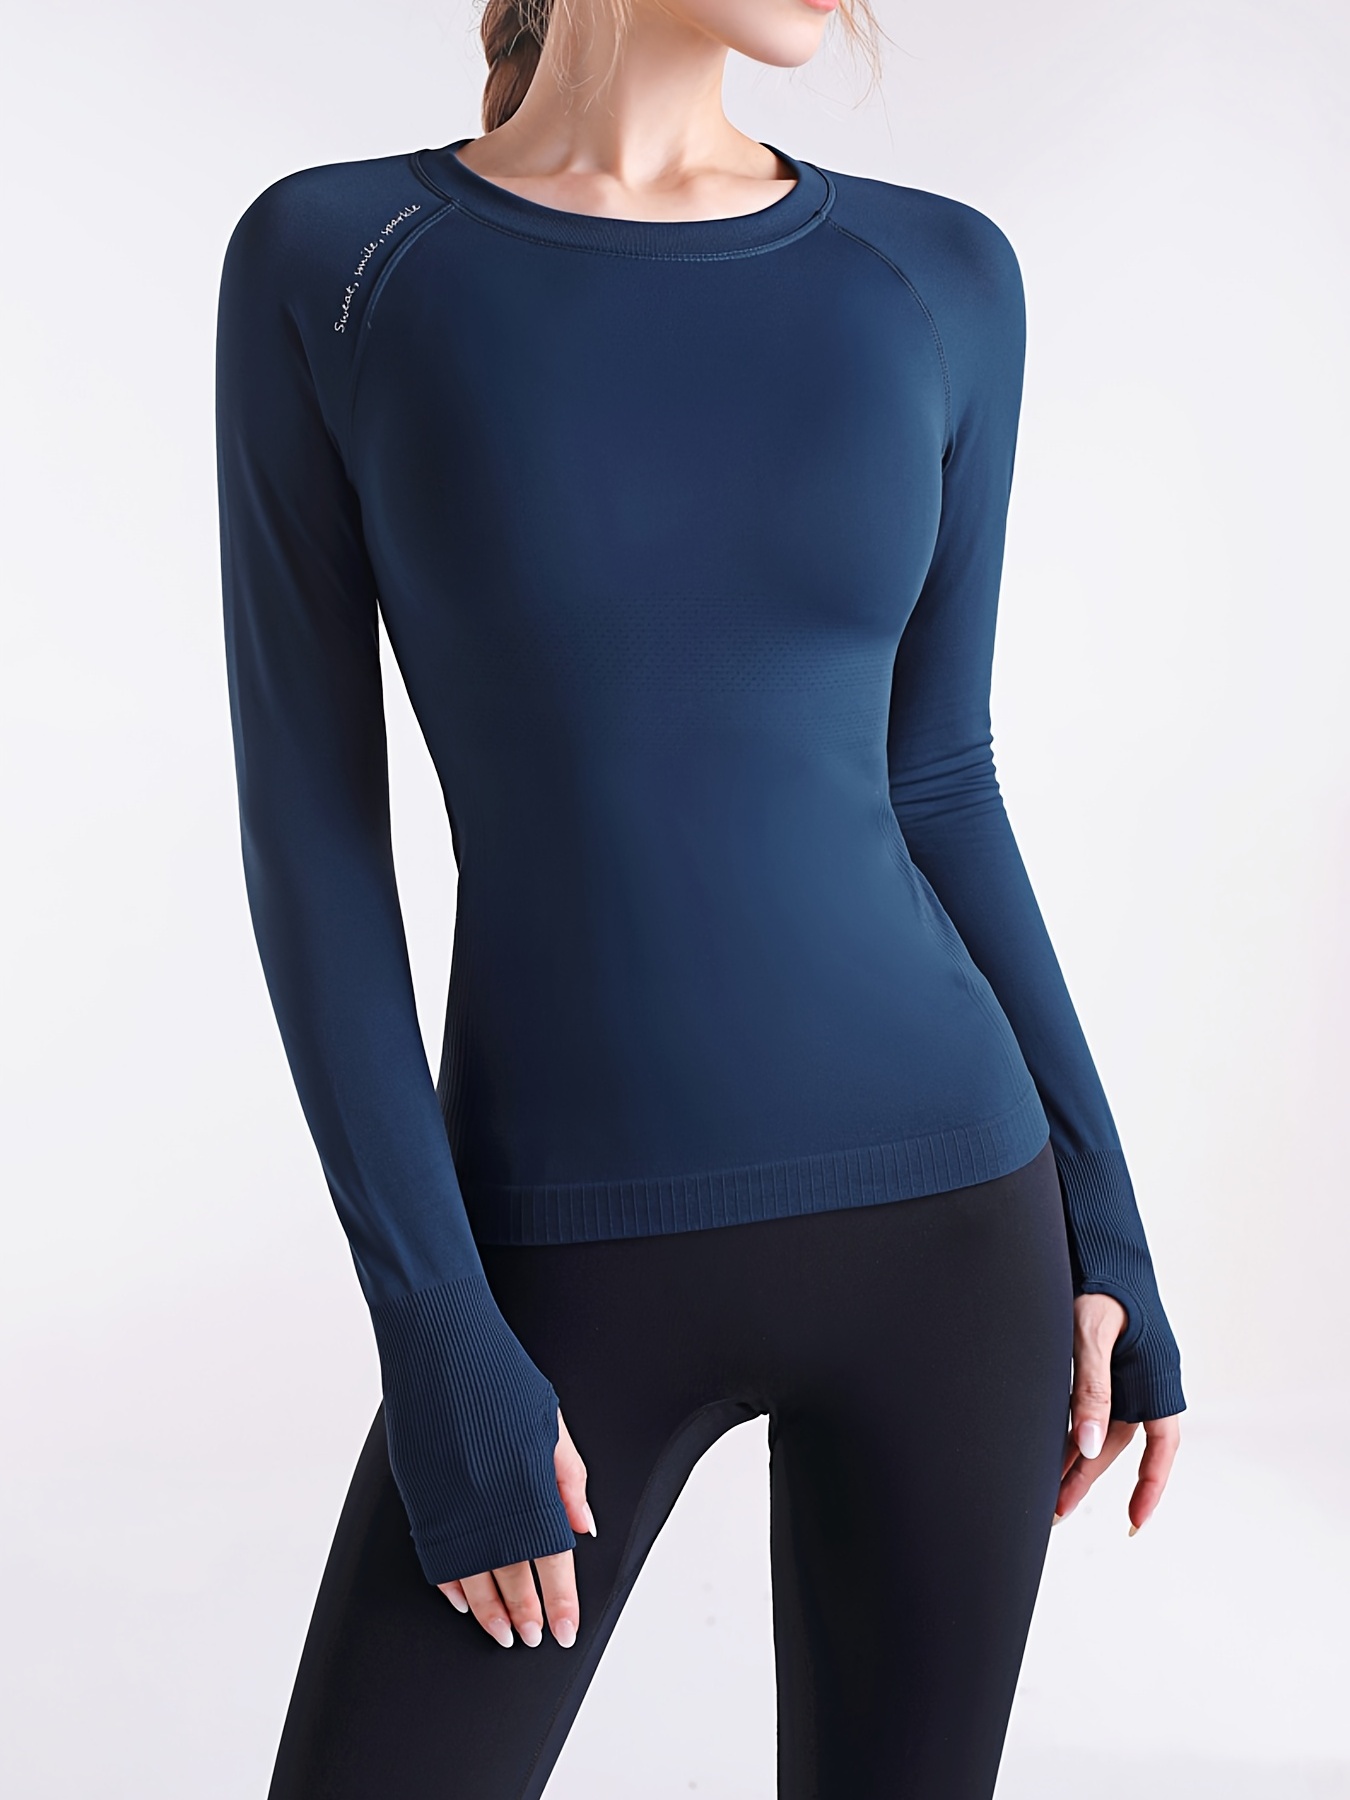 IROINID Savings Dry Fit Shirt Women Long Sleeve Gym Clothes for Women  Running Training Lean, Quick, Dry, Breathable, Tight And V-neck Yoga  Tops,Blue